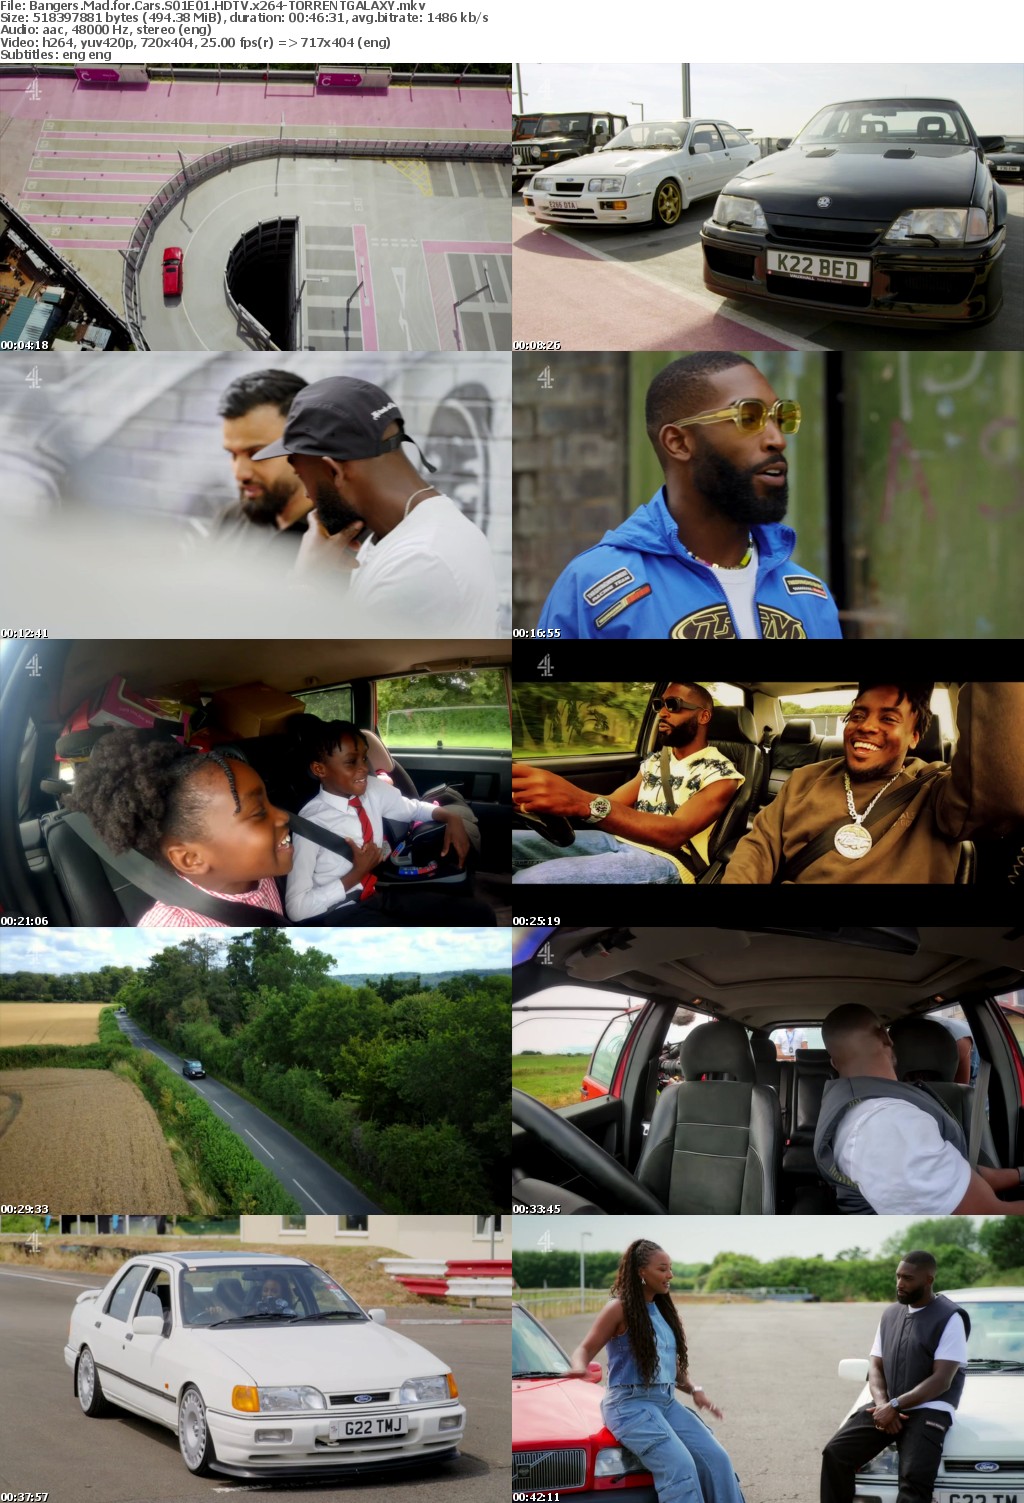 Bangers Mad for Cars S01E01 HDTV x264-GALAXY